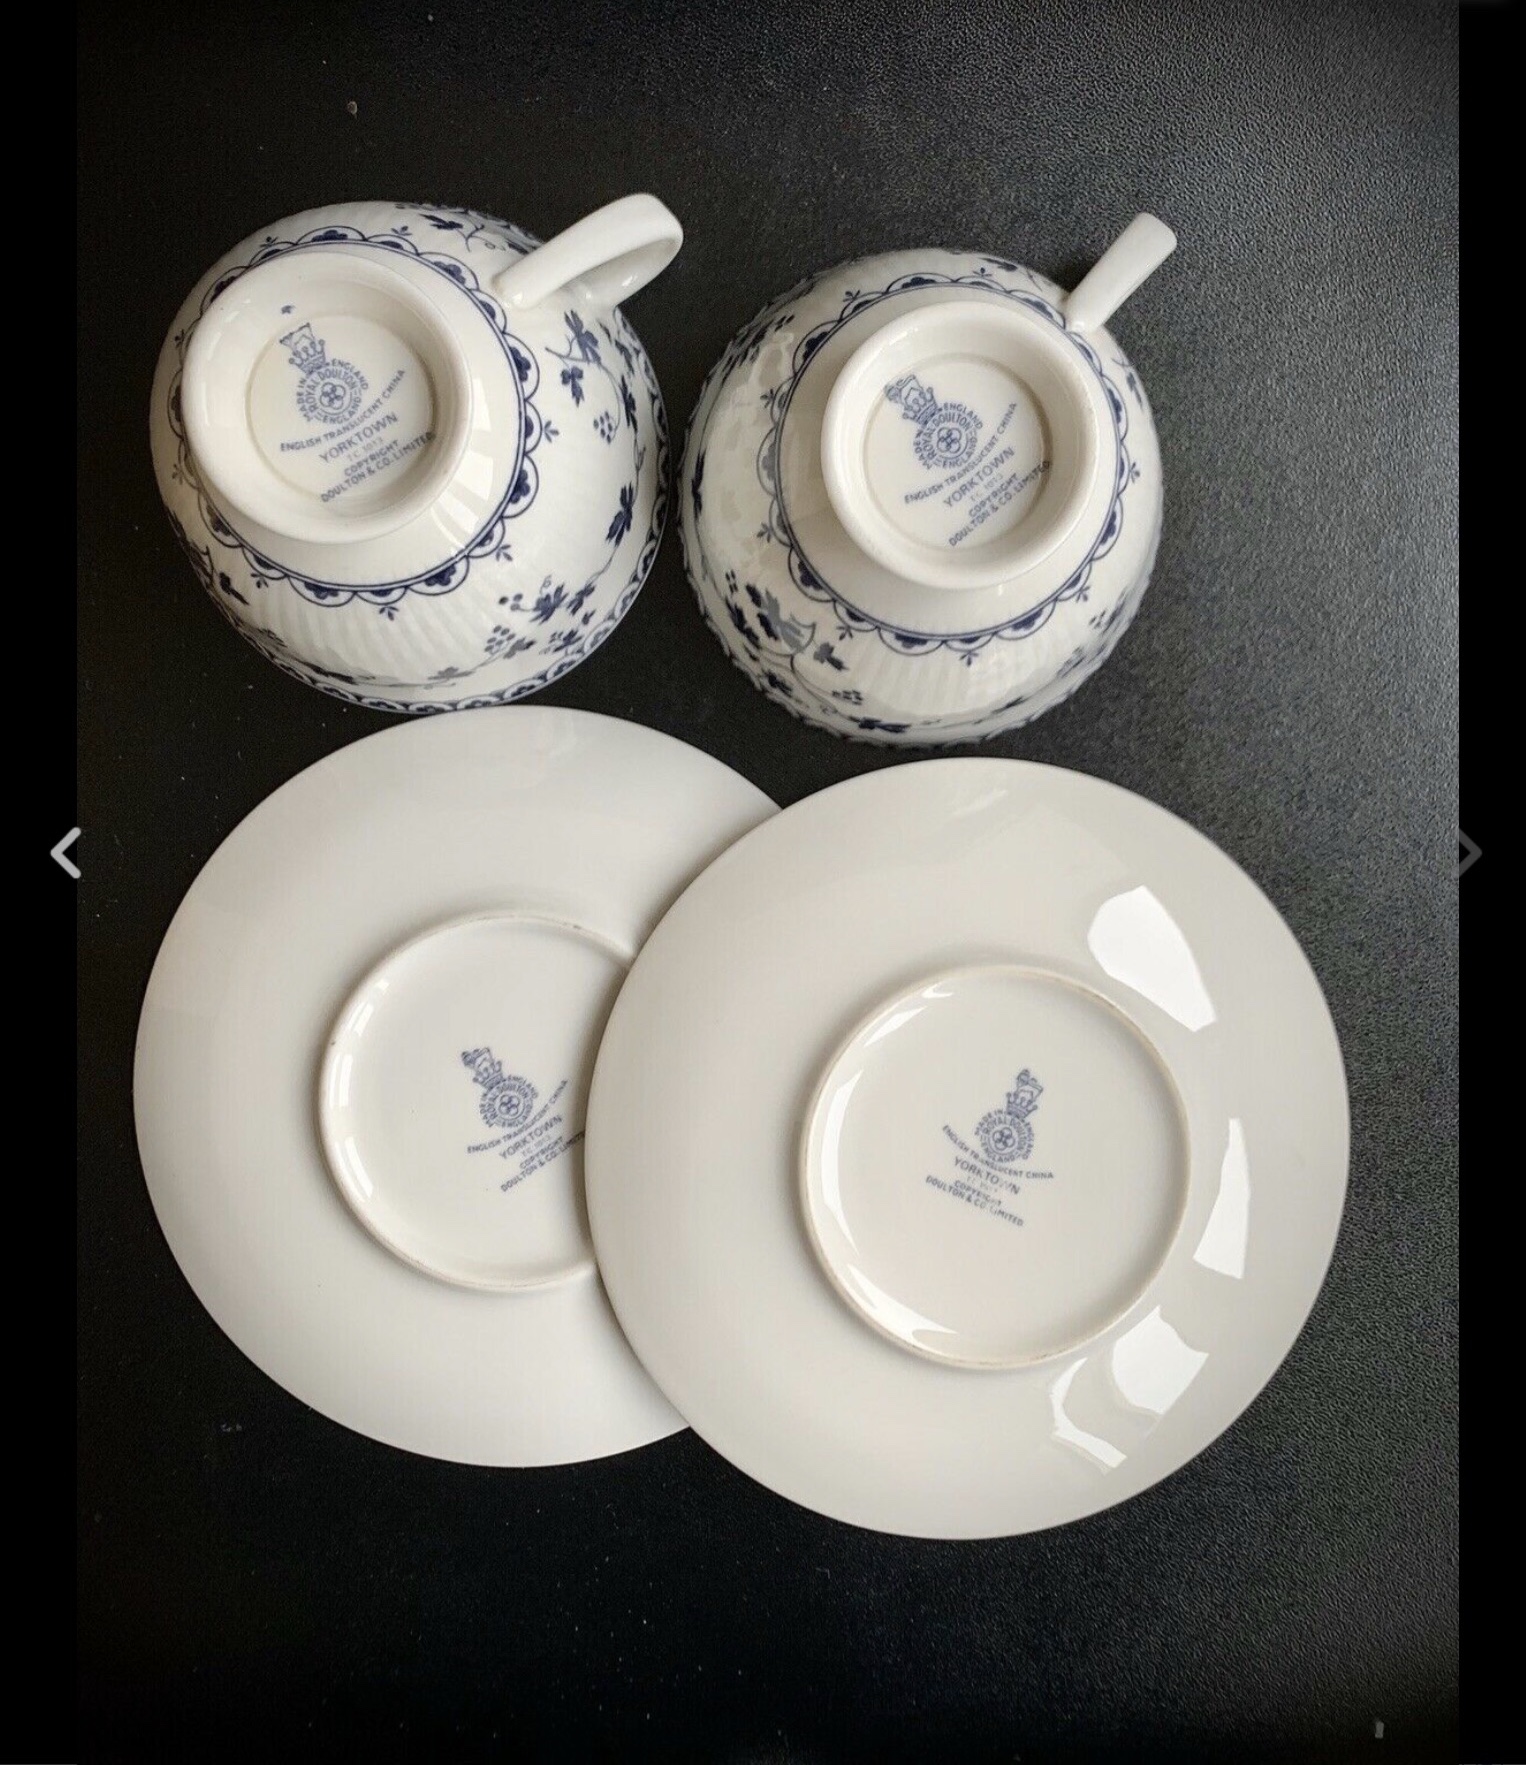 1997 Royal Worcester China tea for two, Primula Tea Cups & Saucers, boxed. - Image 3 of 5